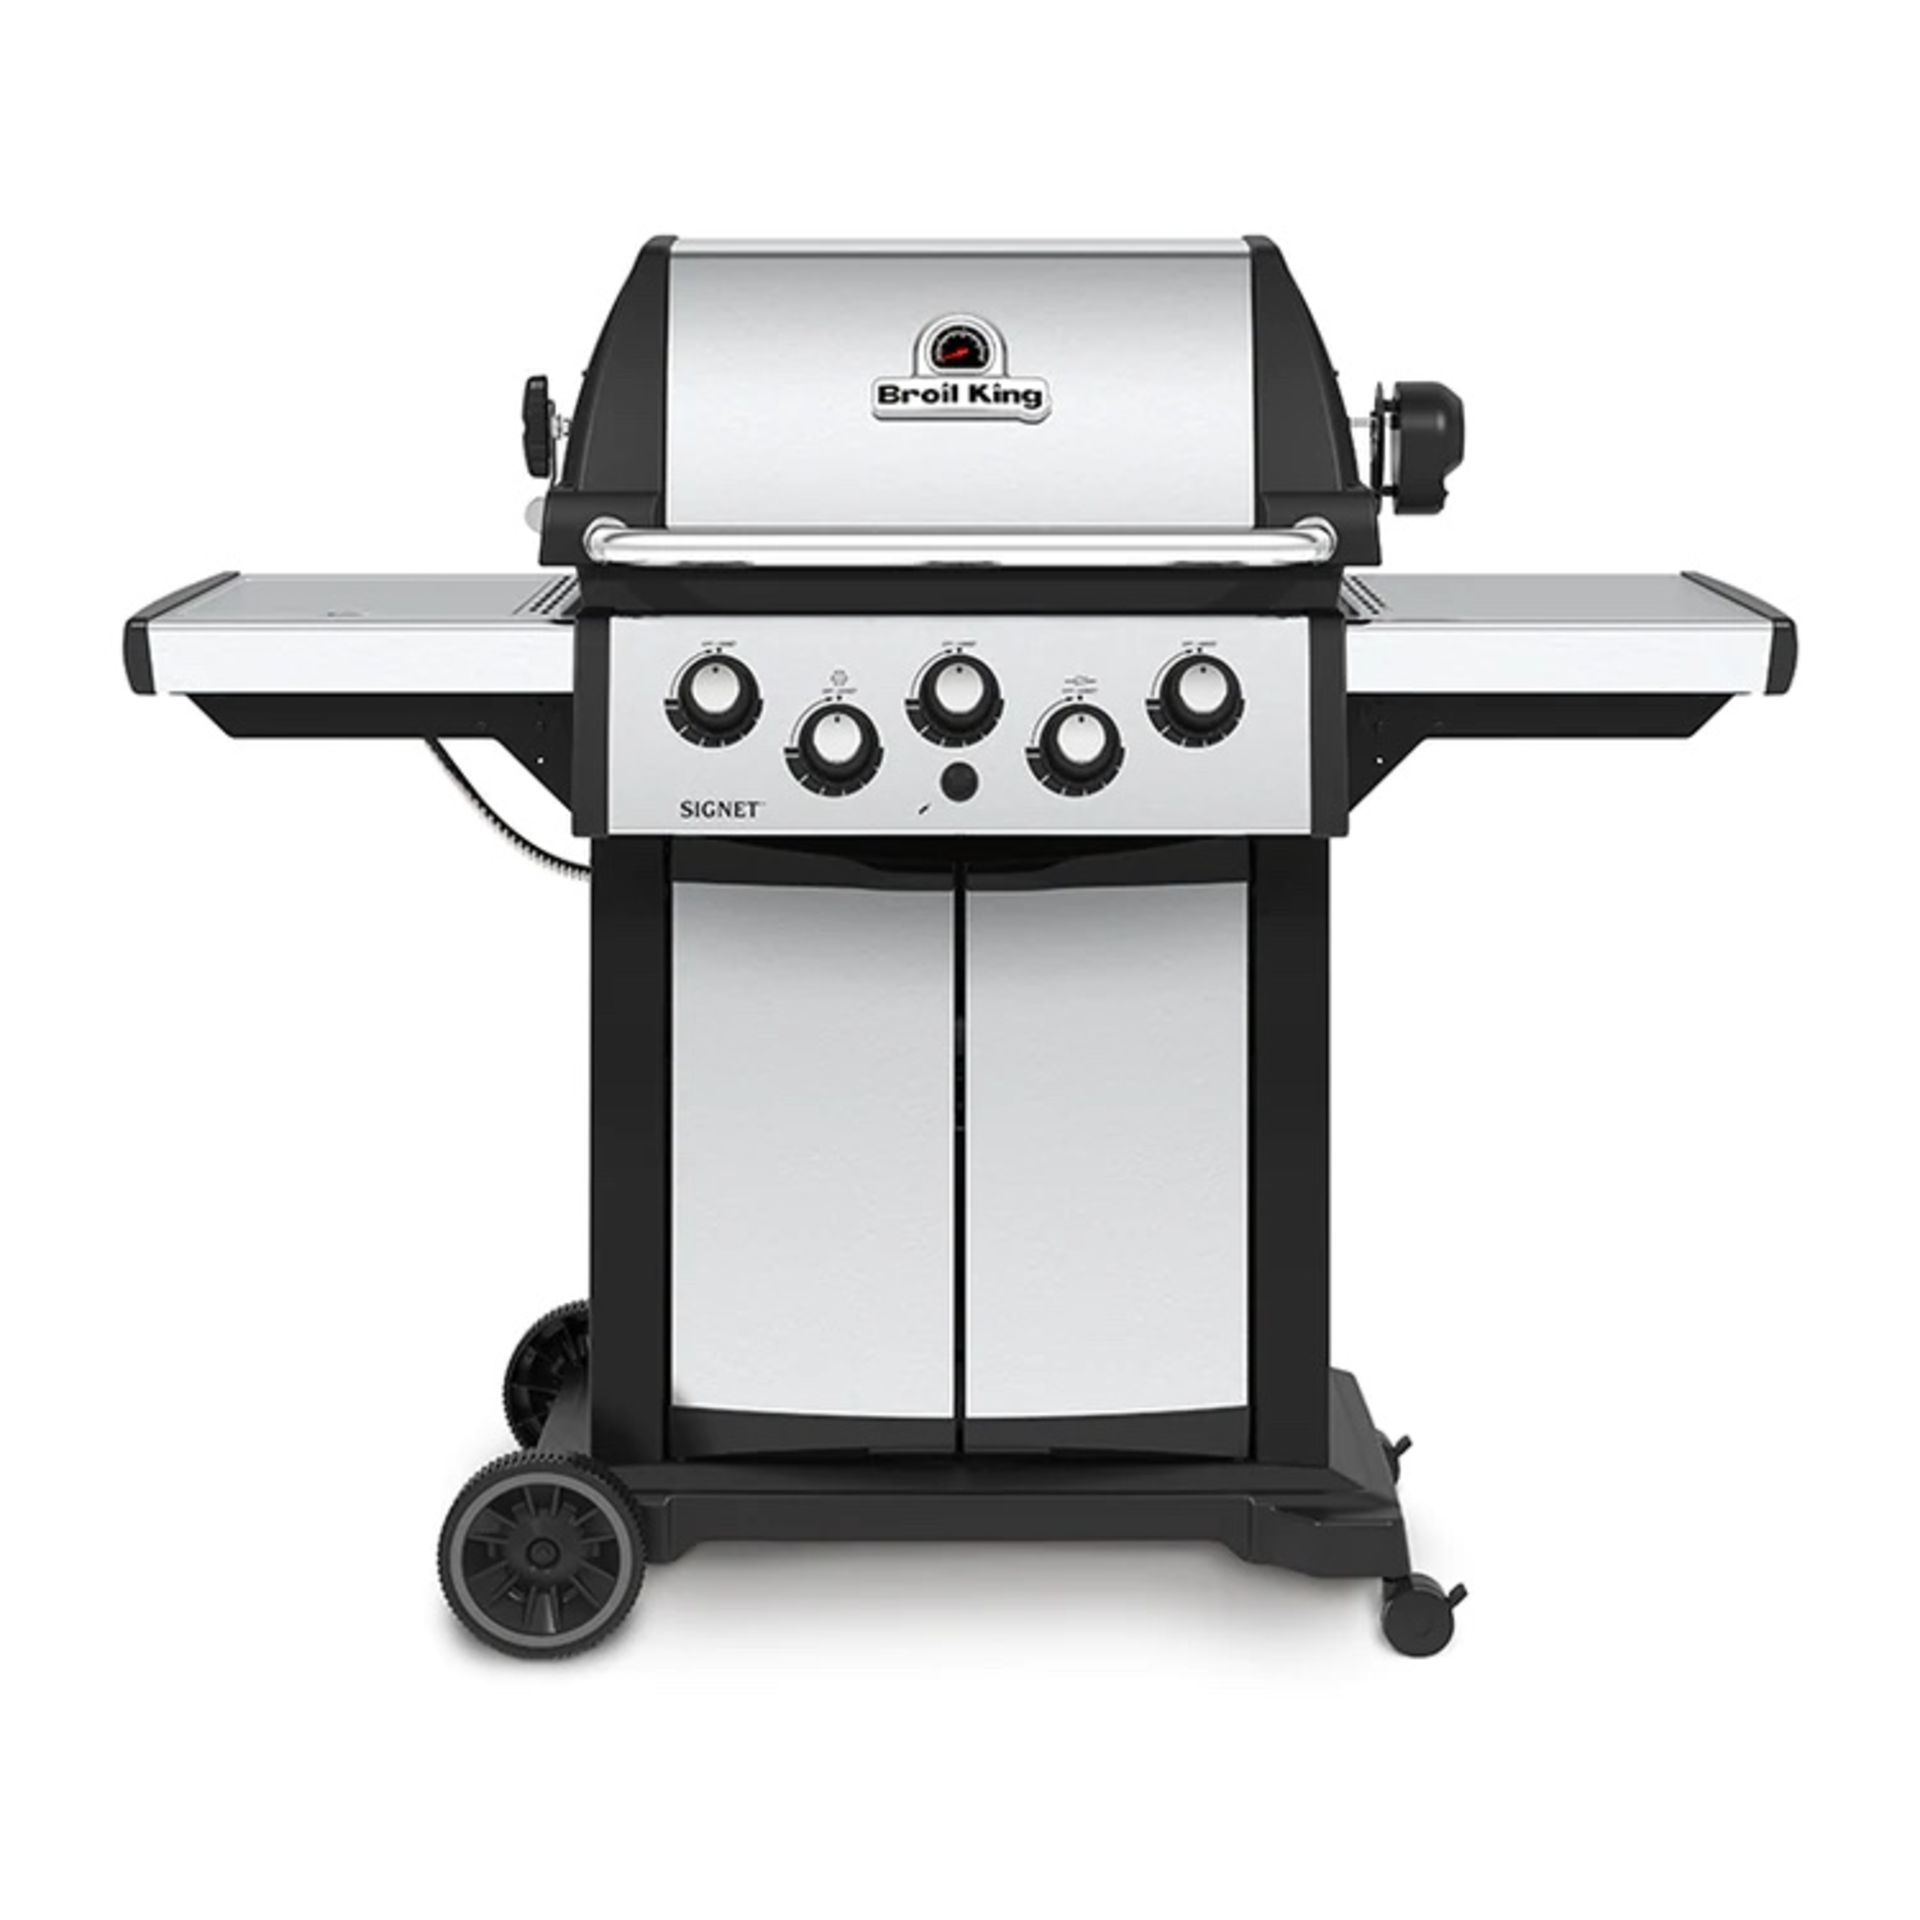 Barbecue - Broil King Signet 90 - Natural Gas Barbeque With Cover